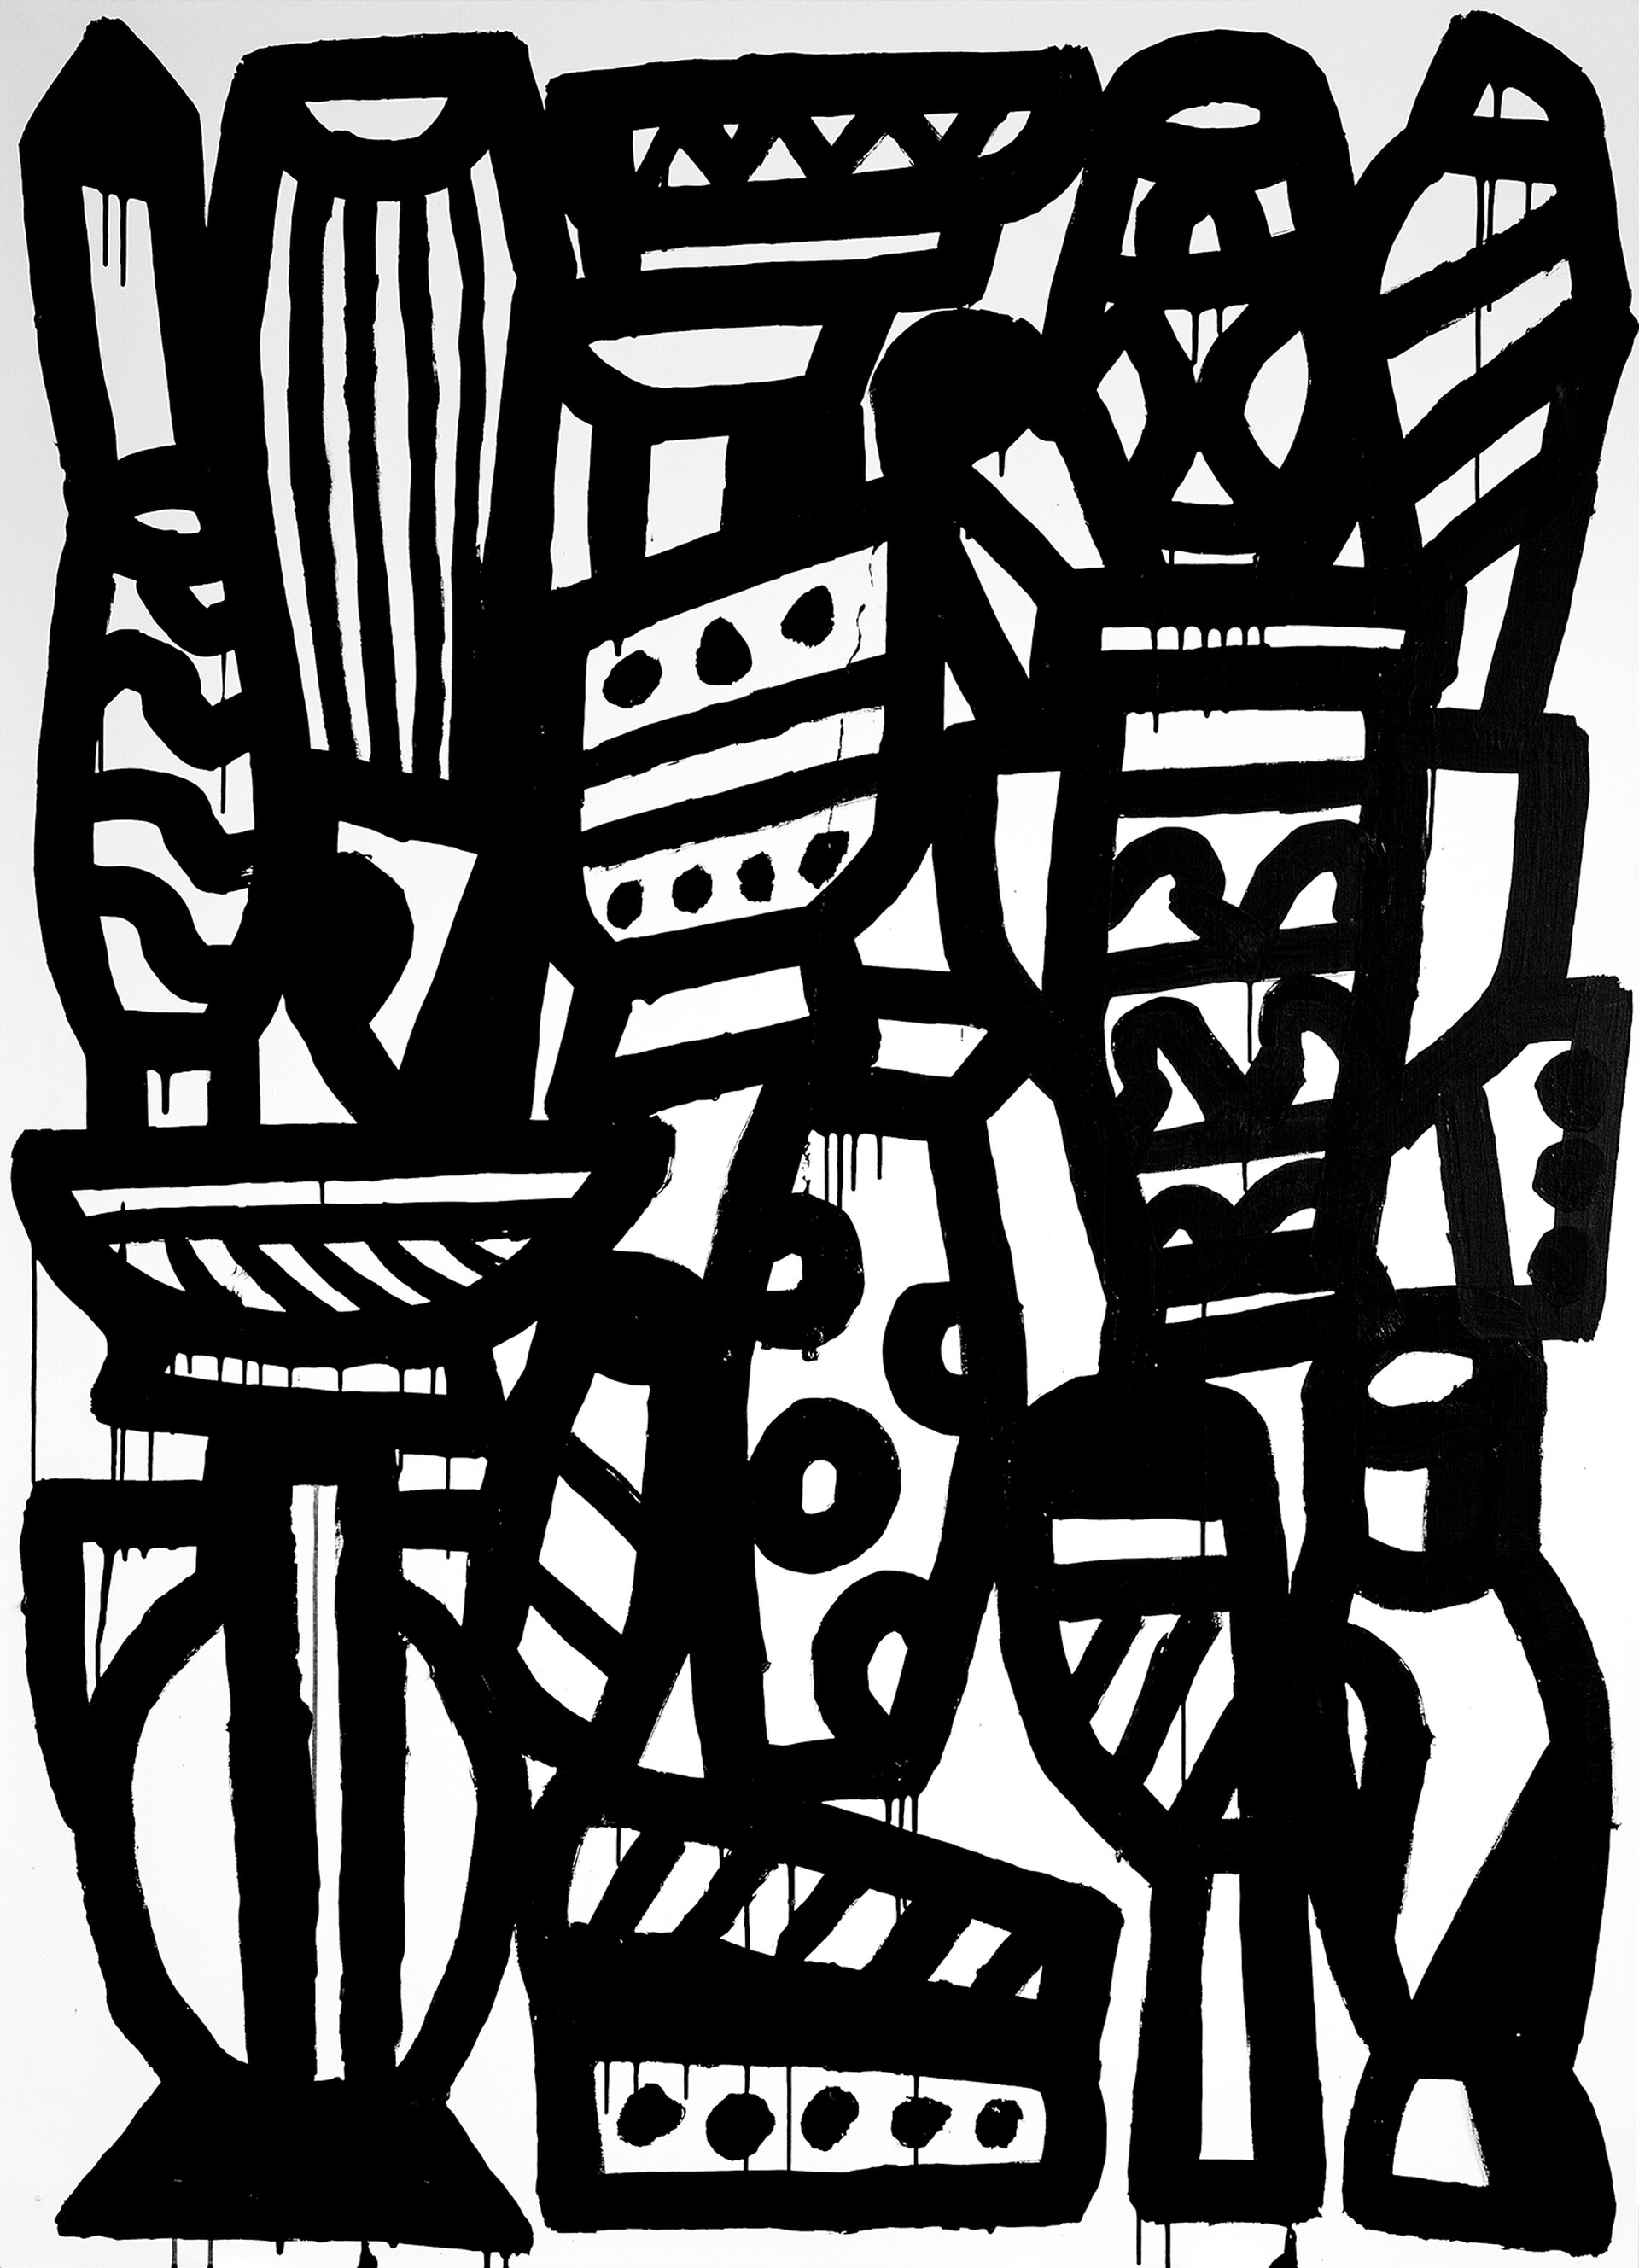 Amphoras”, series of black and white paintings, 180 x 130 cm, acrylic paint on canvas, 2020